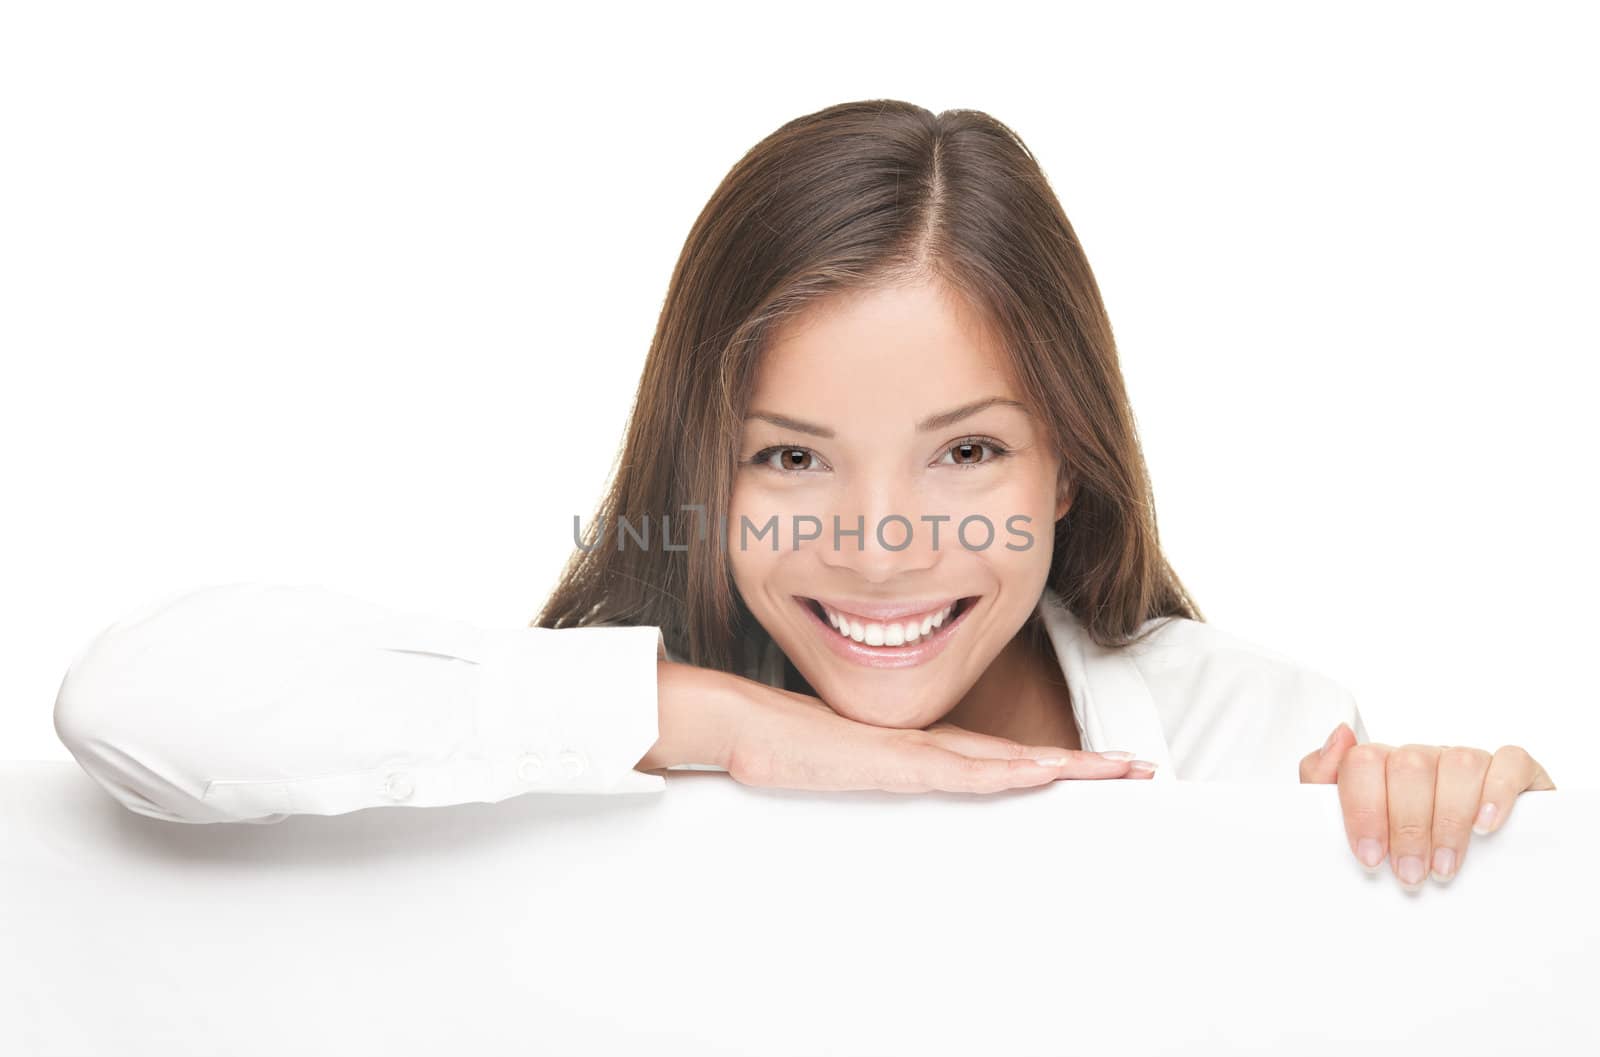 Woman billboard sign. Young beautiful woman smiling showing blank white placard.  Casual and relaxed pose by young Asian / Caucasian female model with friendly smile. Isolated on white background 